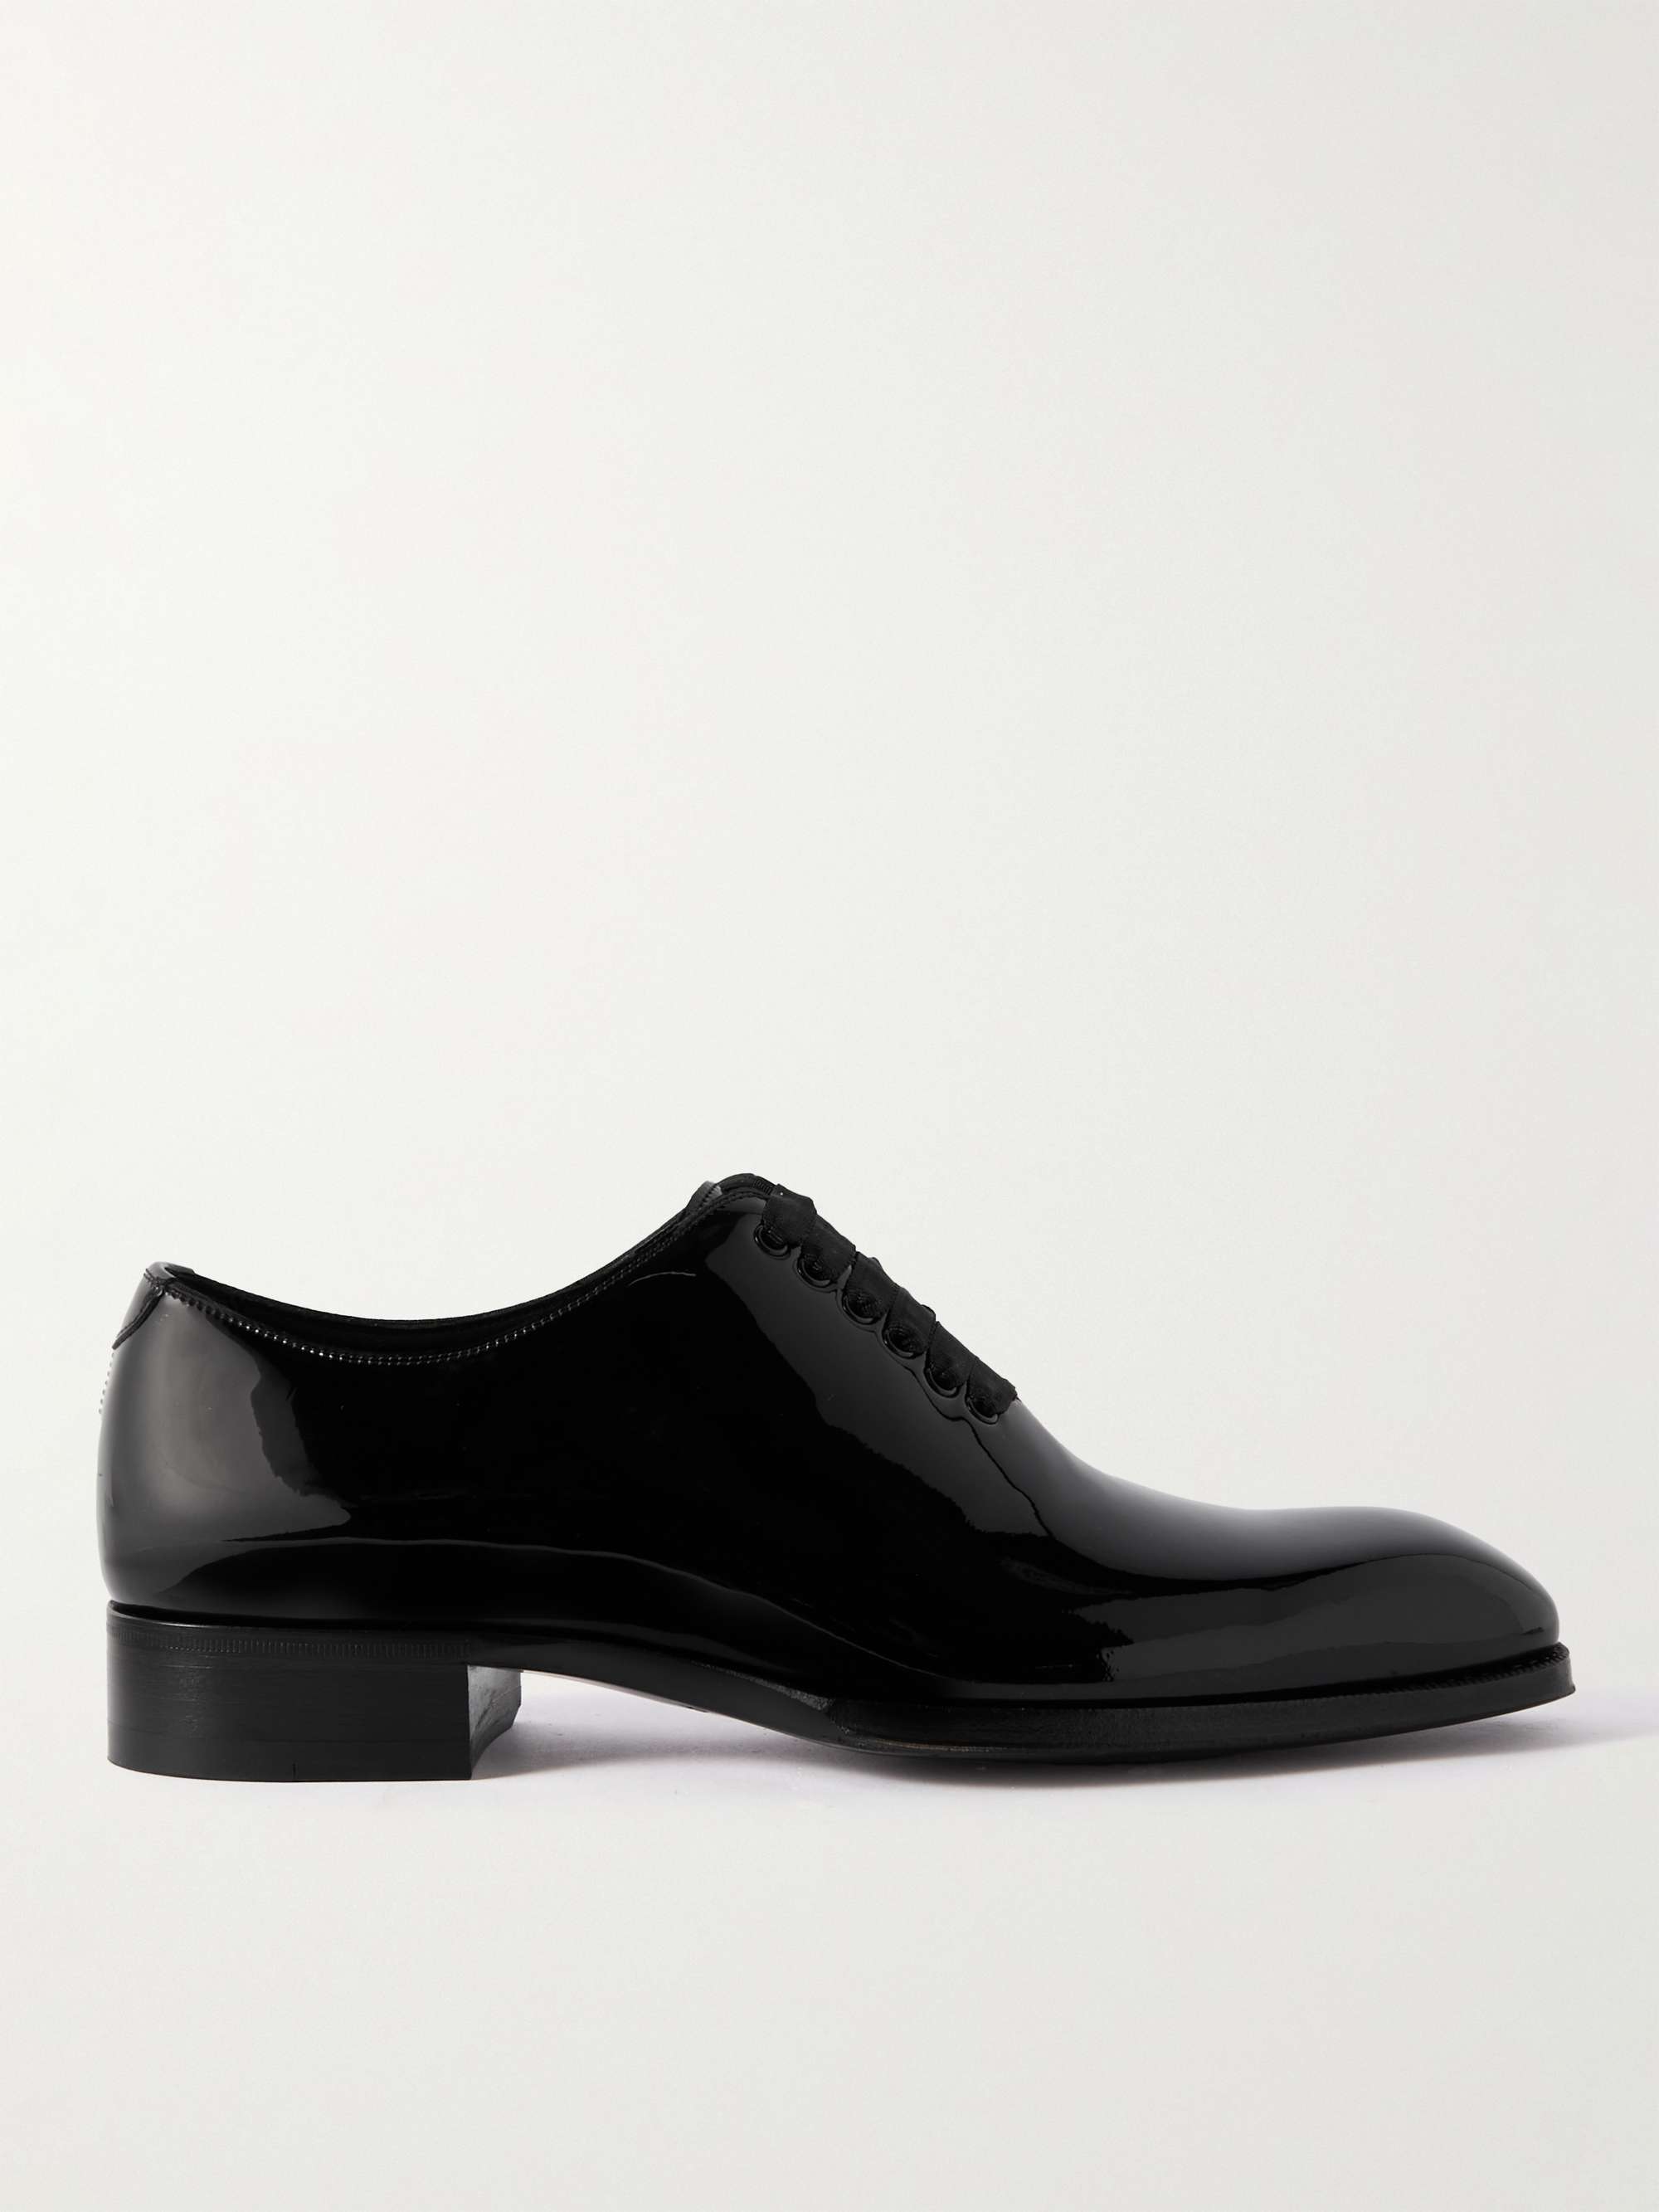 TOM FORD Elkan Whole-Cut Patent-Leather Oxford Shoes for Men | MR PORTER